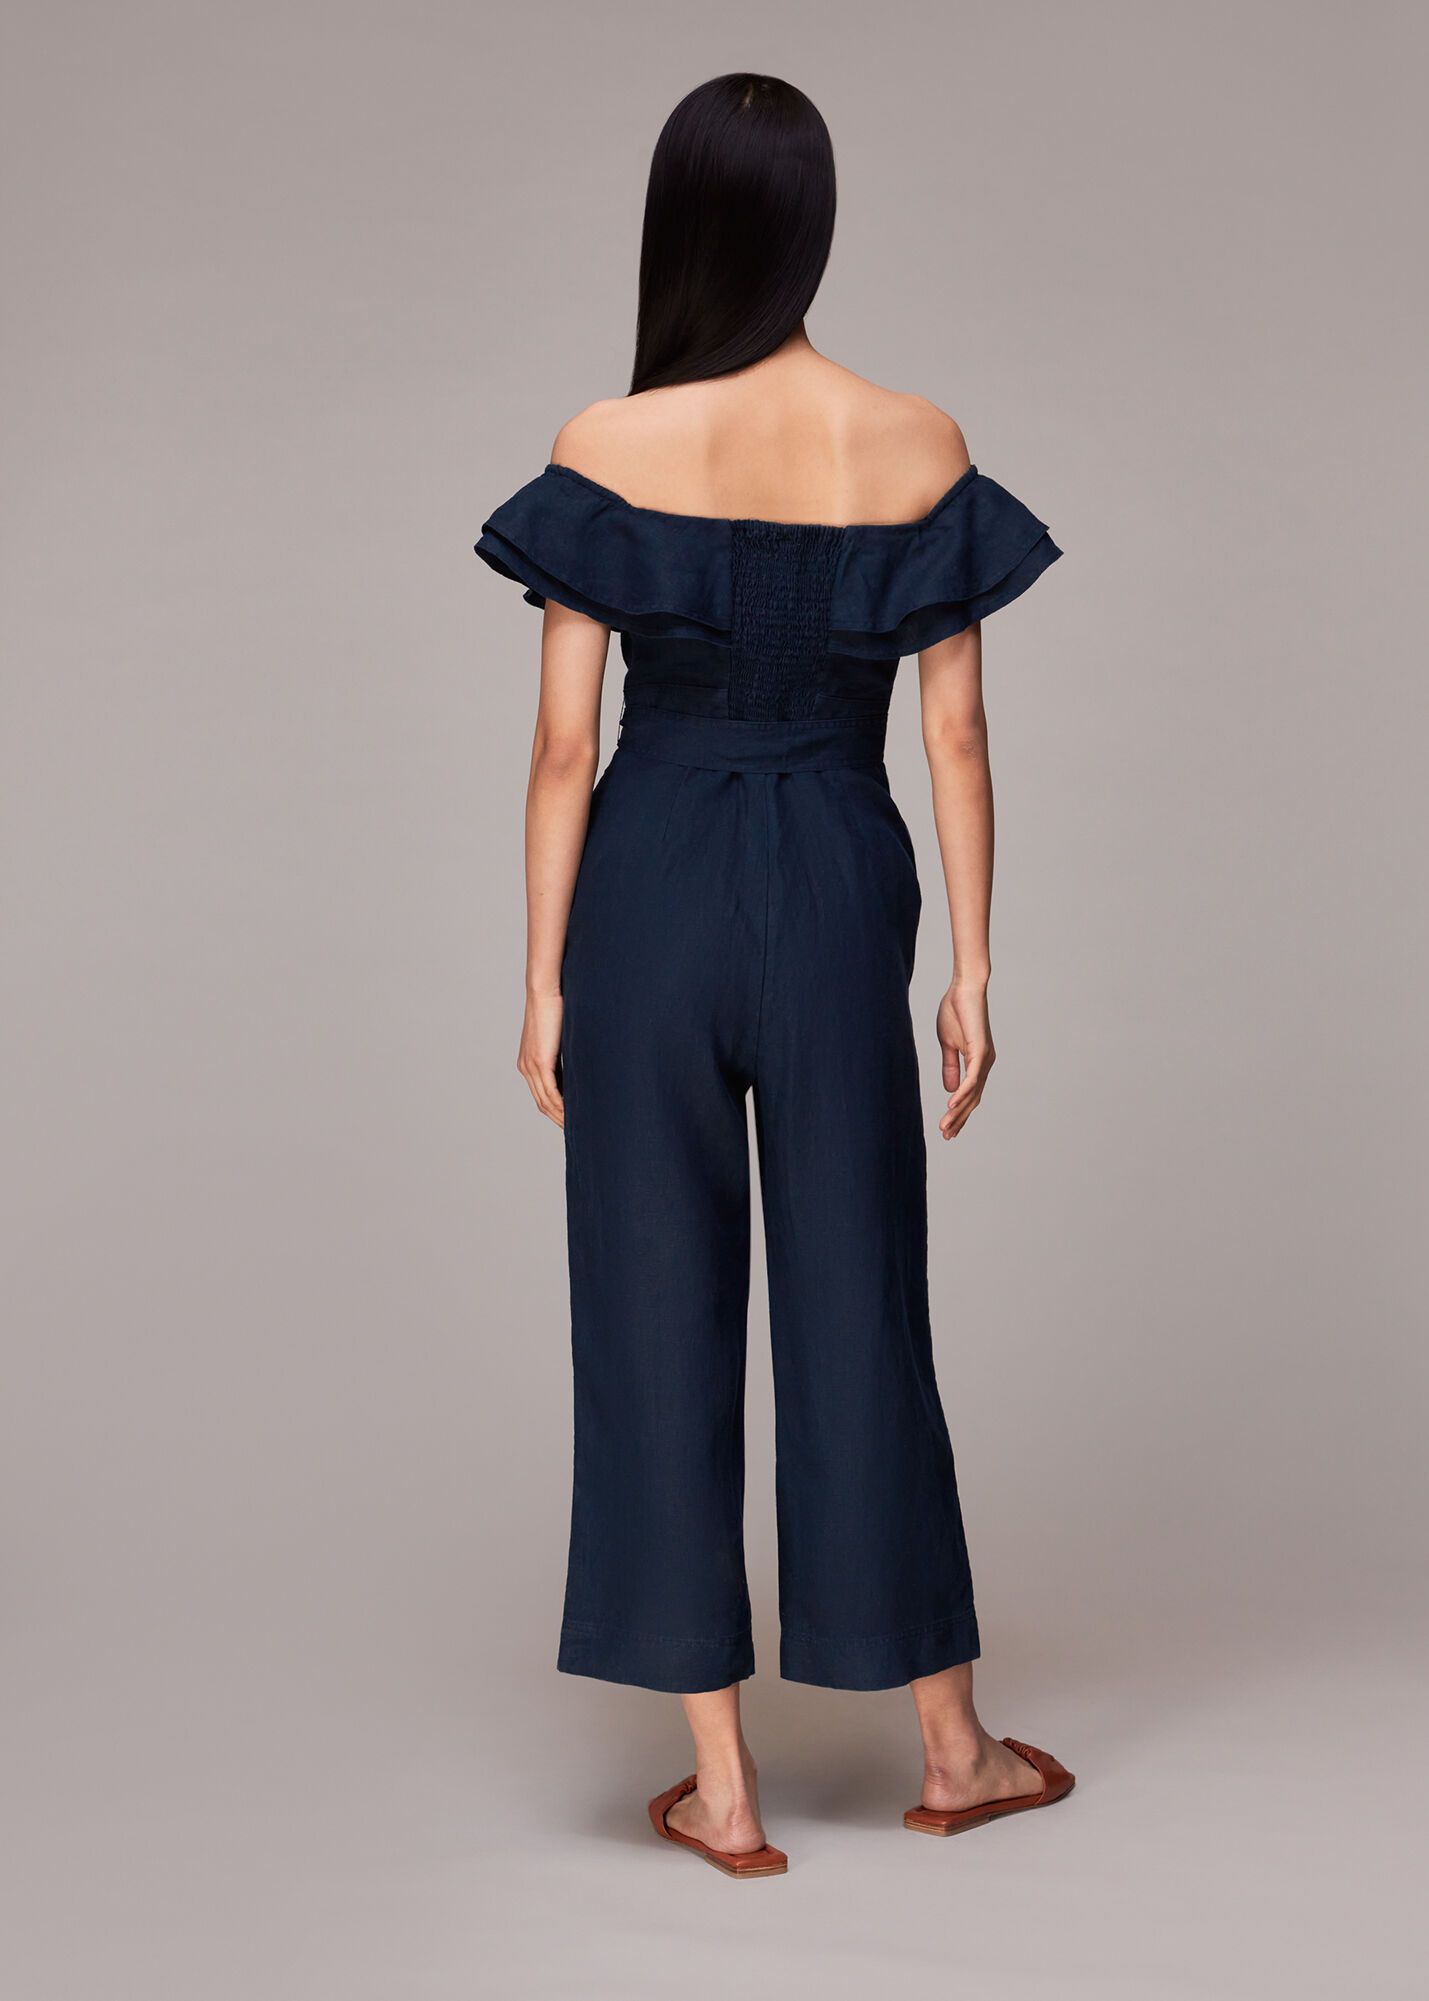 Whistles Tabi Linen Bardot Jumpsuit in Navy Blue Womens Clothing Jumpsuits and rompers Full-length jumpsuits and rompers 